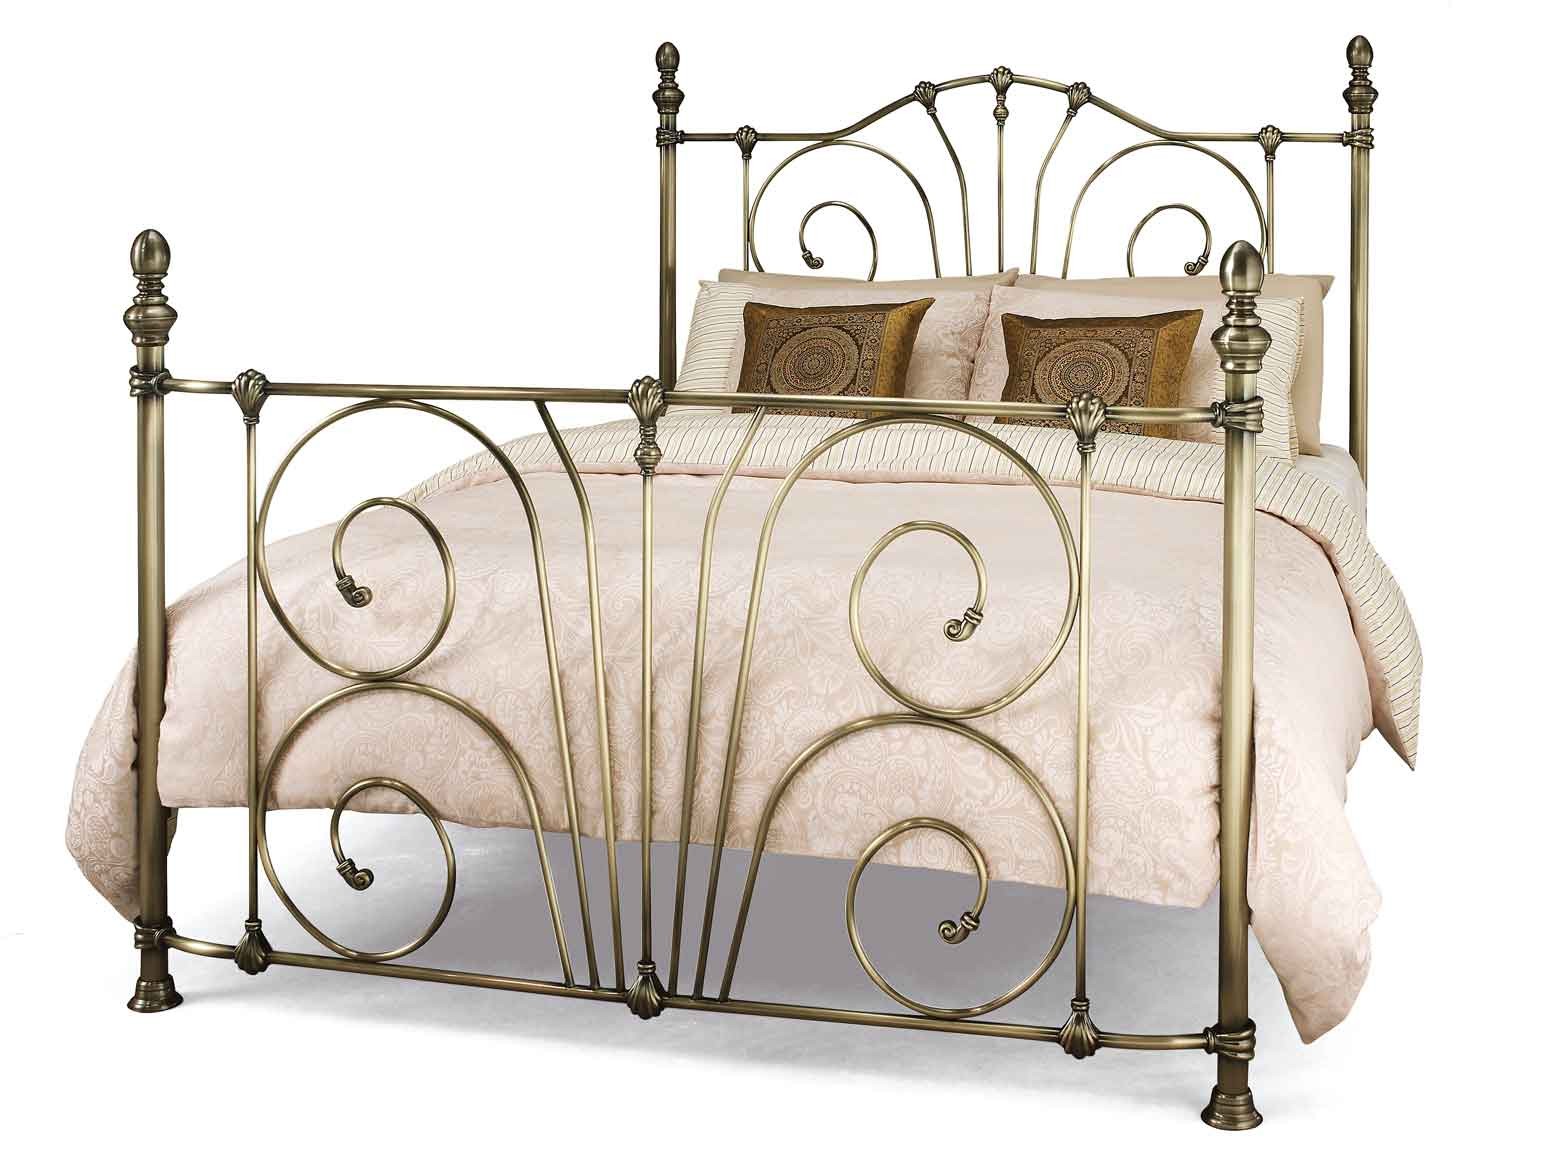 Jessica Metal Bed Assembly Instructions (Serene)